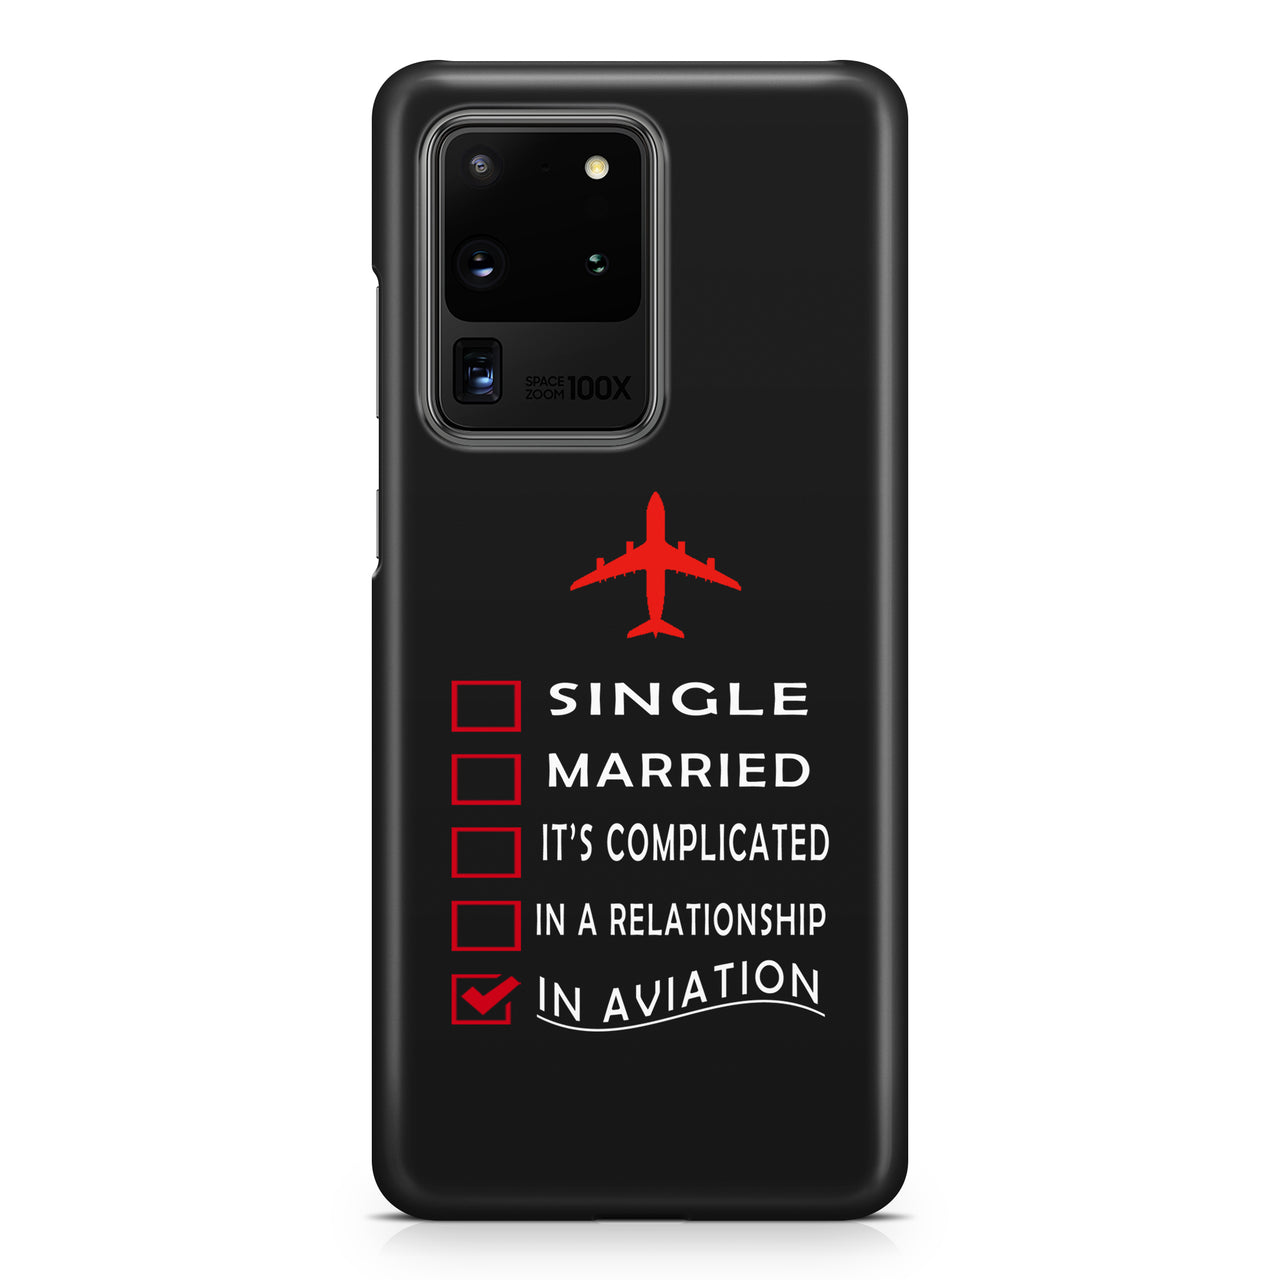 In Aviation Samsung A Cases